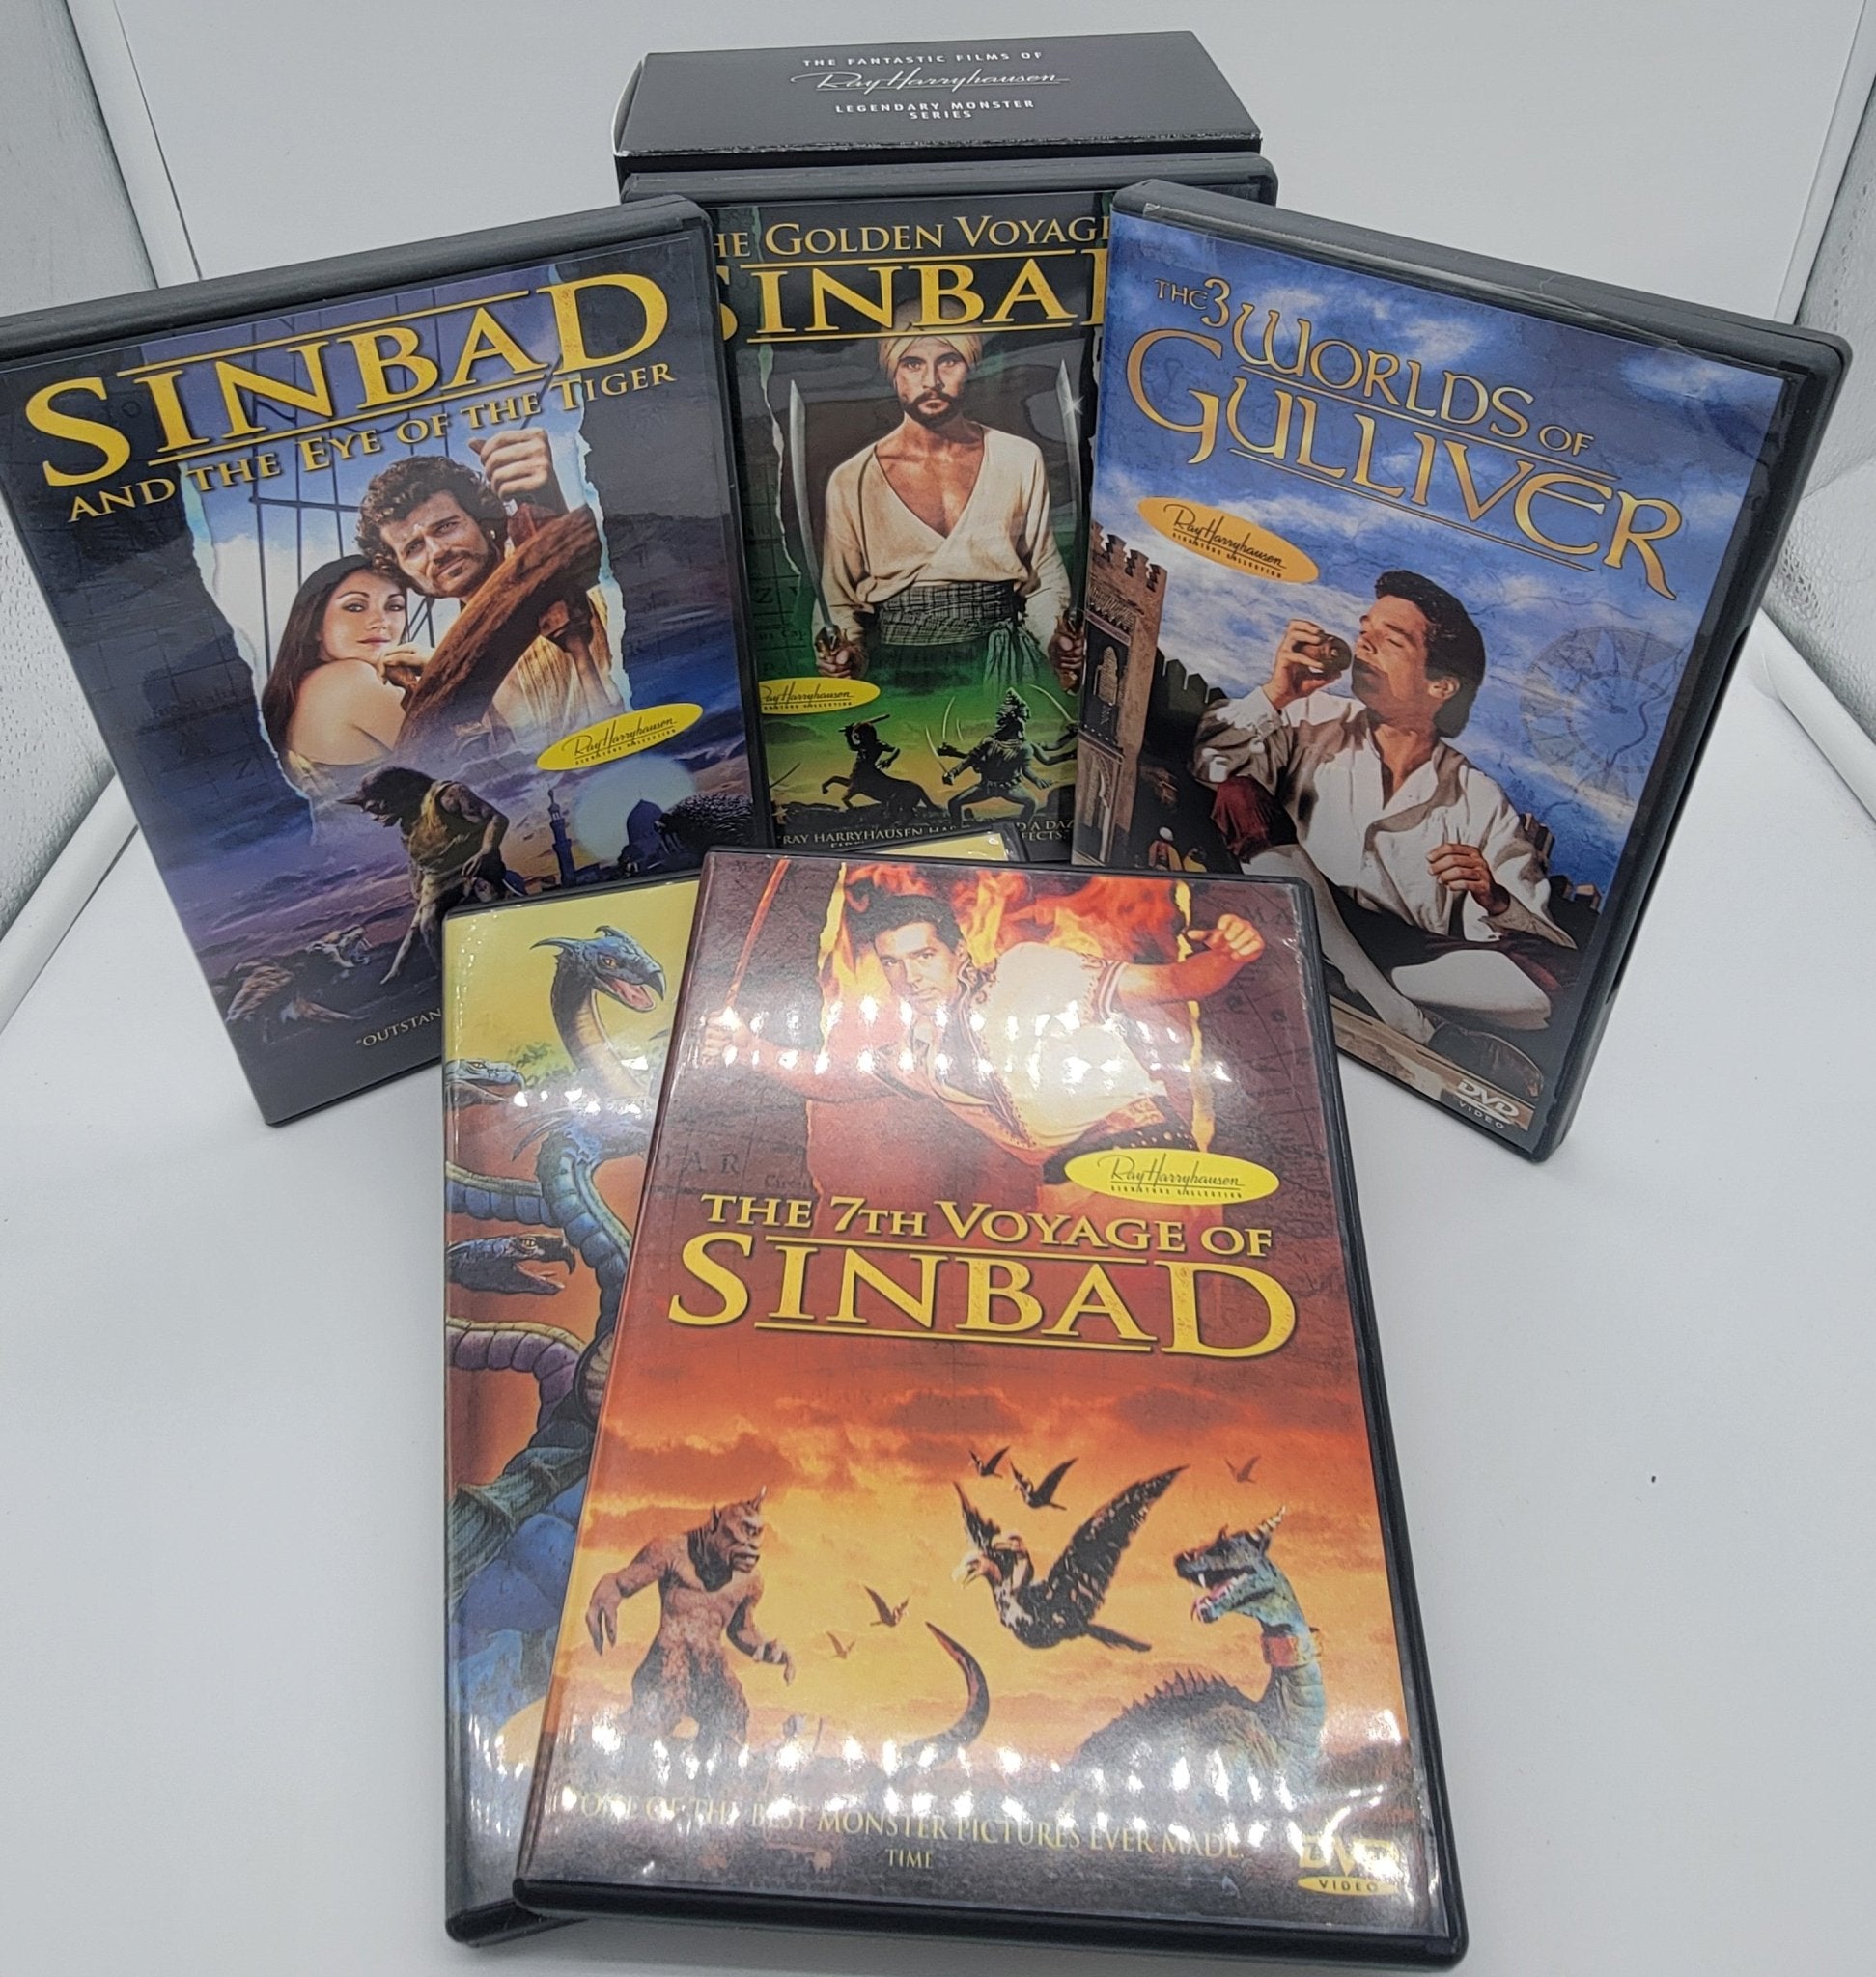 Columbia Pictures - Ray Harryhausen - Legendary Monster Series - The Fantastic Films | SINBAD - 5 Disc Set - DVD - Steady Bunny Shop